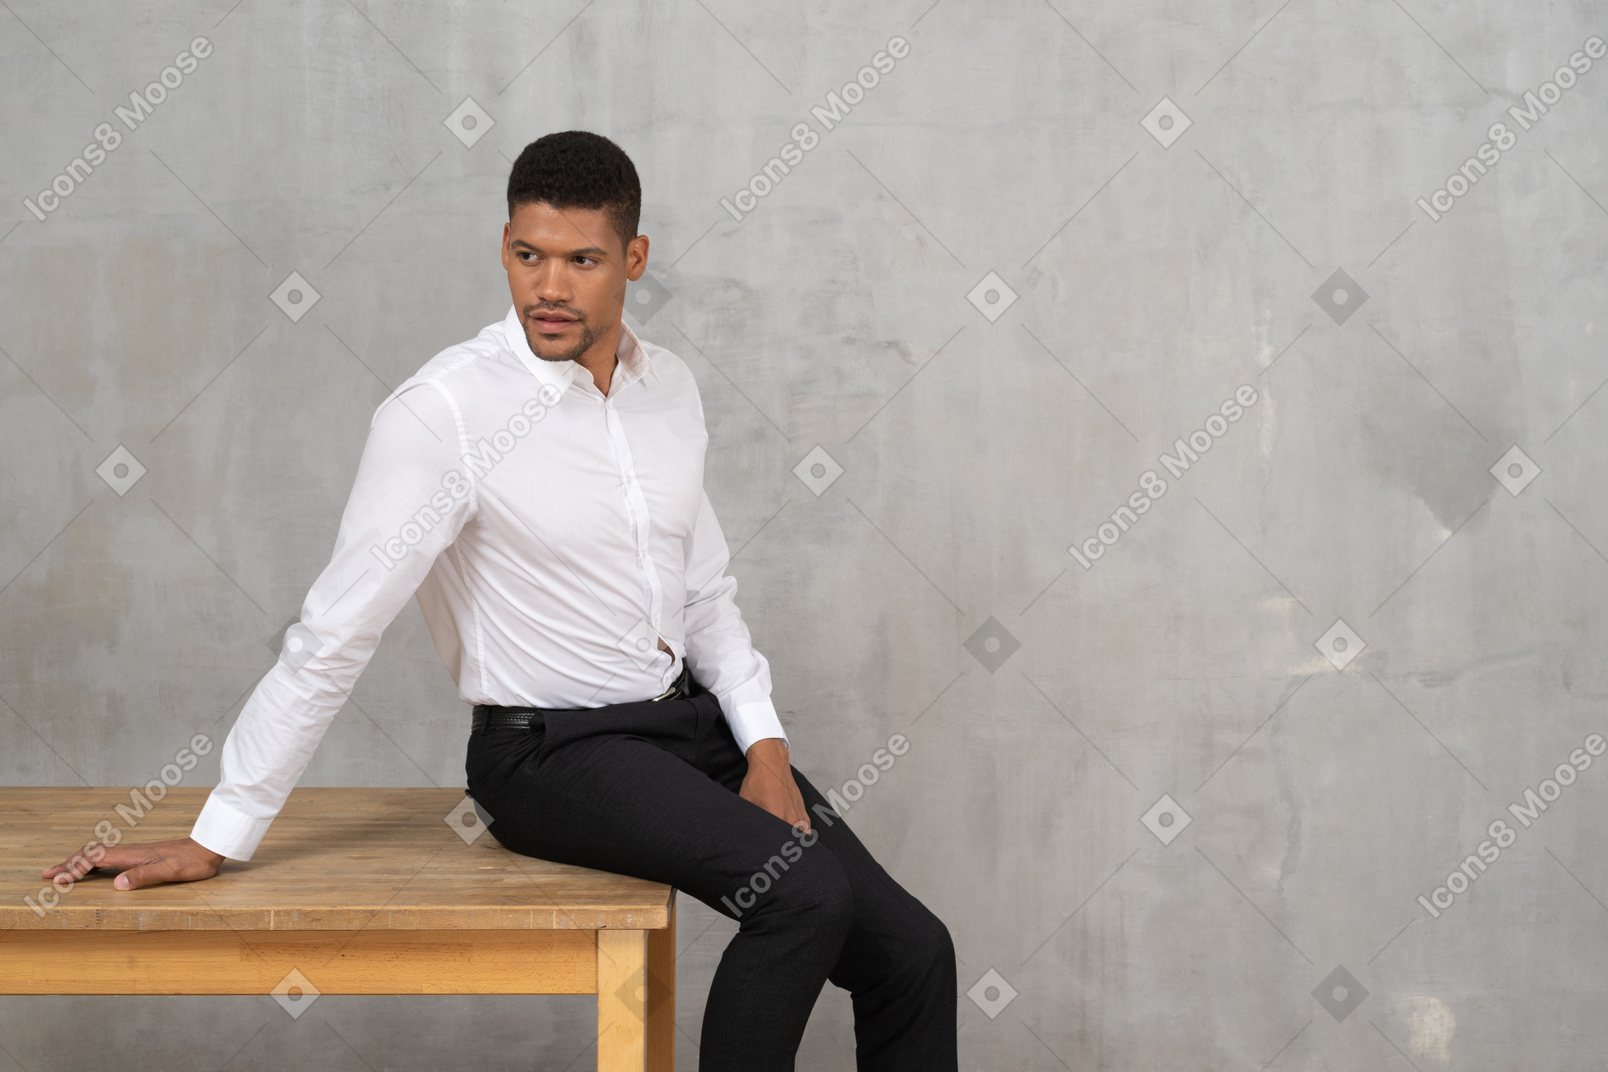 Man in office clothes sitting on a table